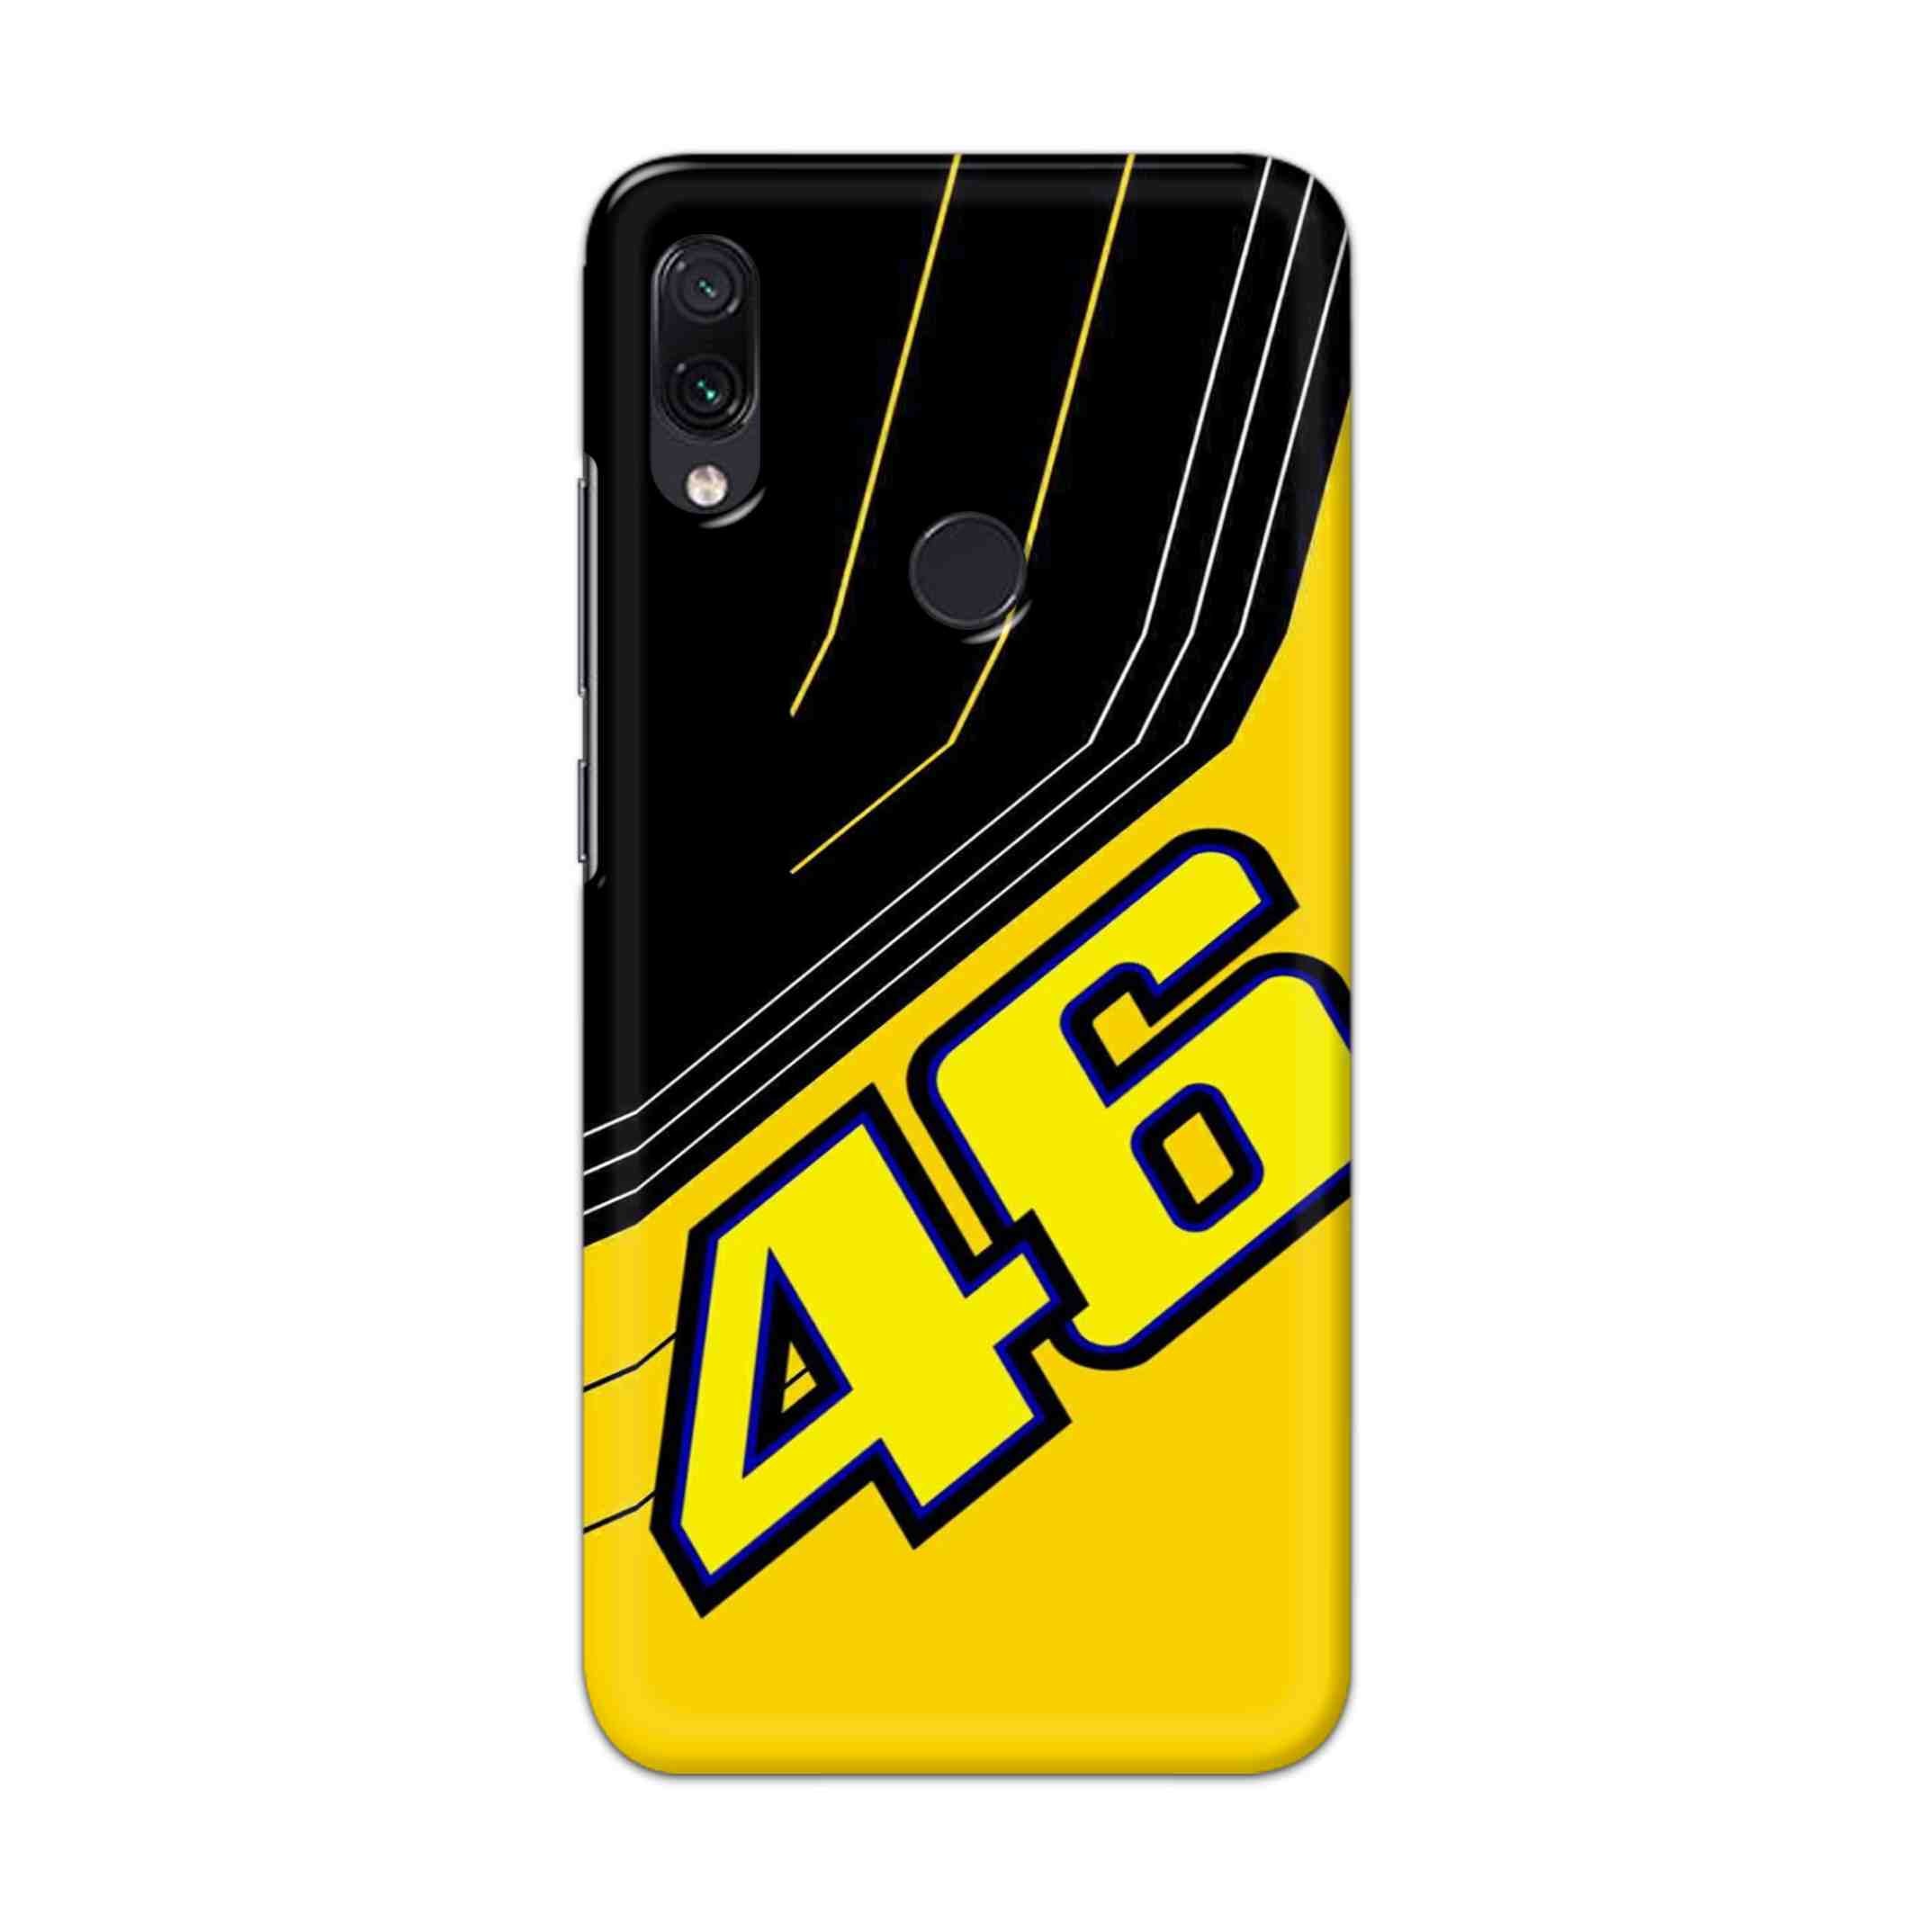 Buy 46 Hard Back Mobile Phone Case Cover For Redmi Note 7 / Note 7 Pro Online